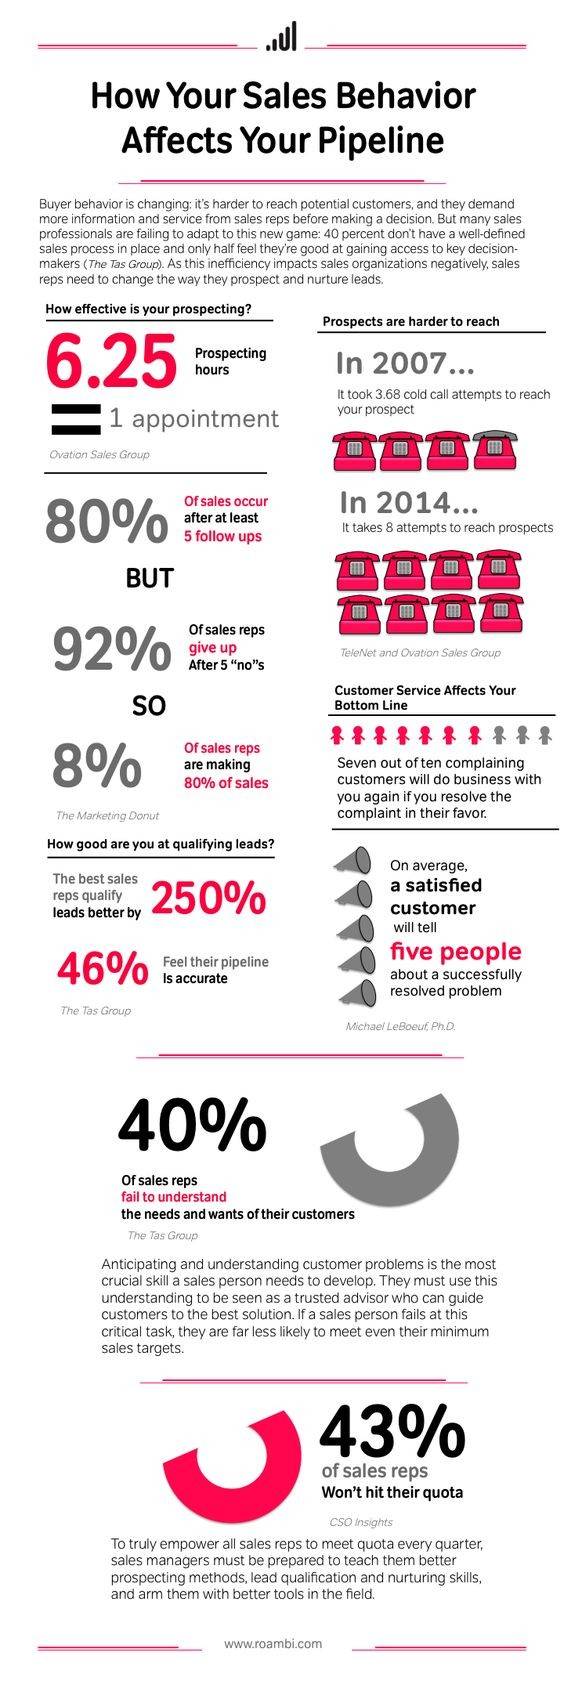 Statistics on how your sales behavior affects your pipeline.